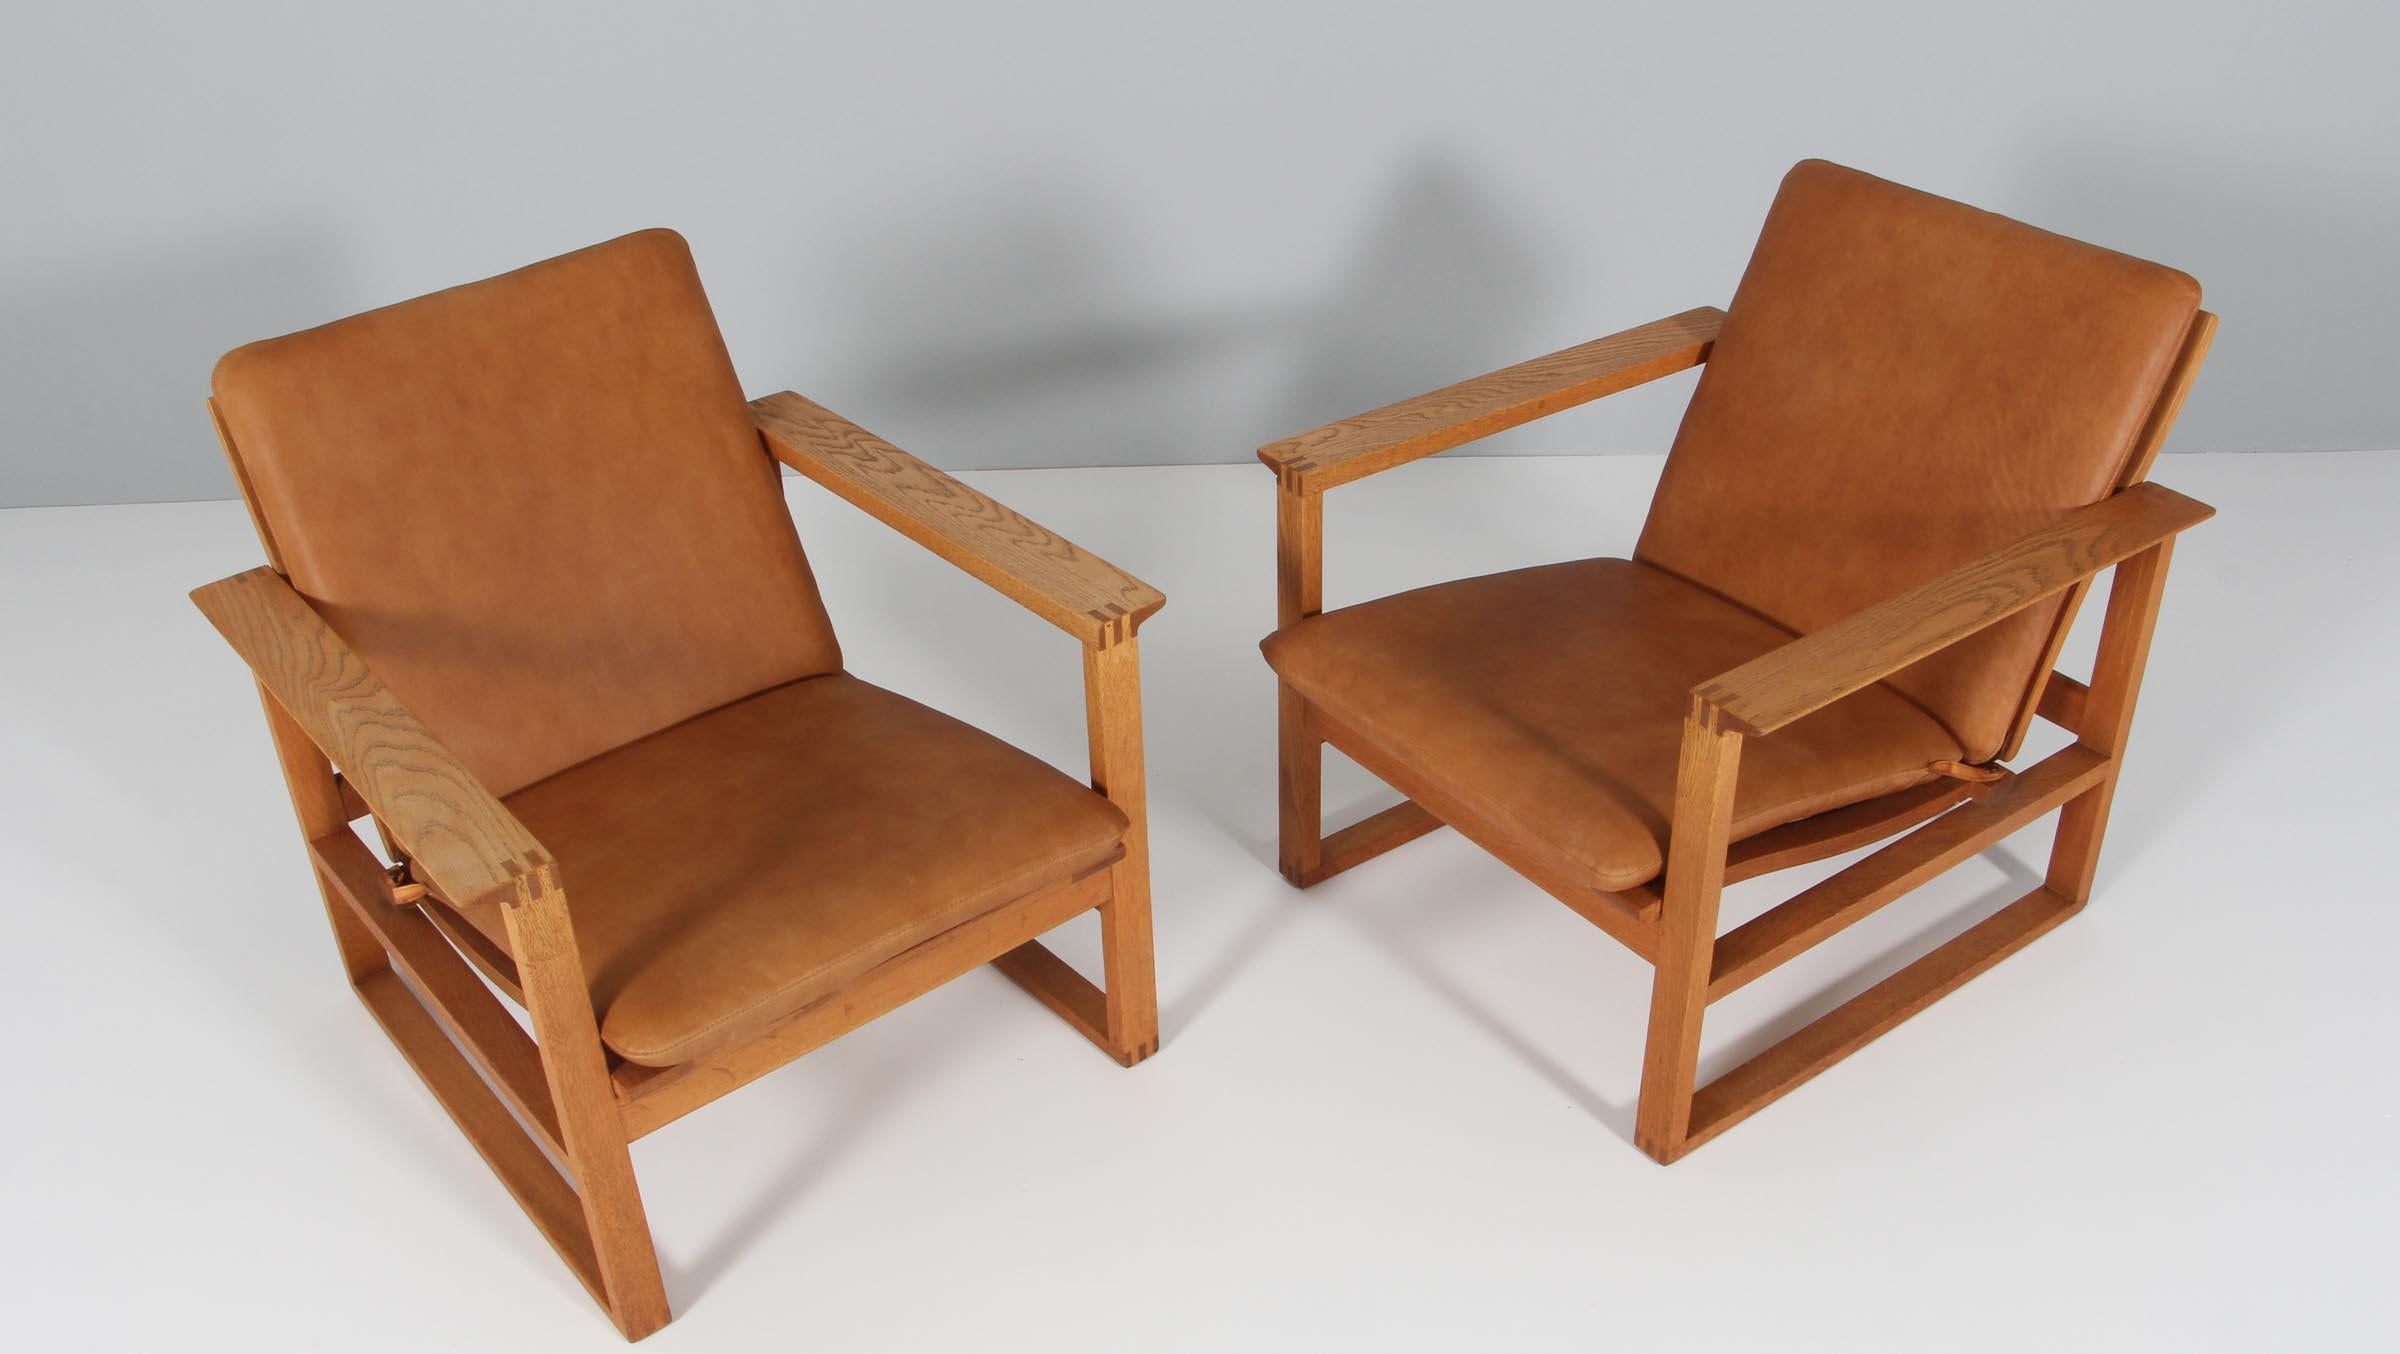 Børge Mogensen lounge chairs new upholstered with vintage aniline leather.

Frame of oak.

Model 2256, made by Fredericia furniture.